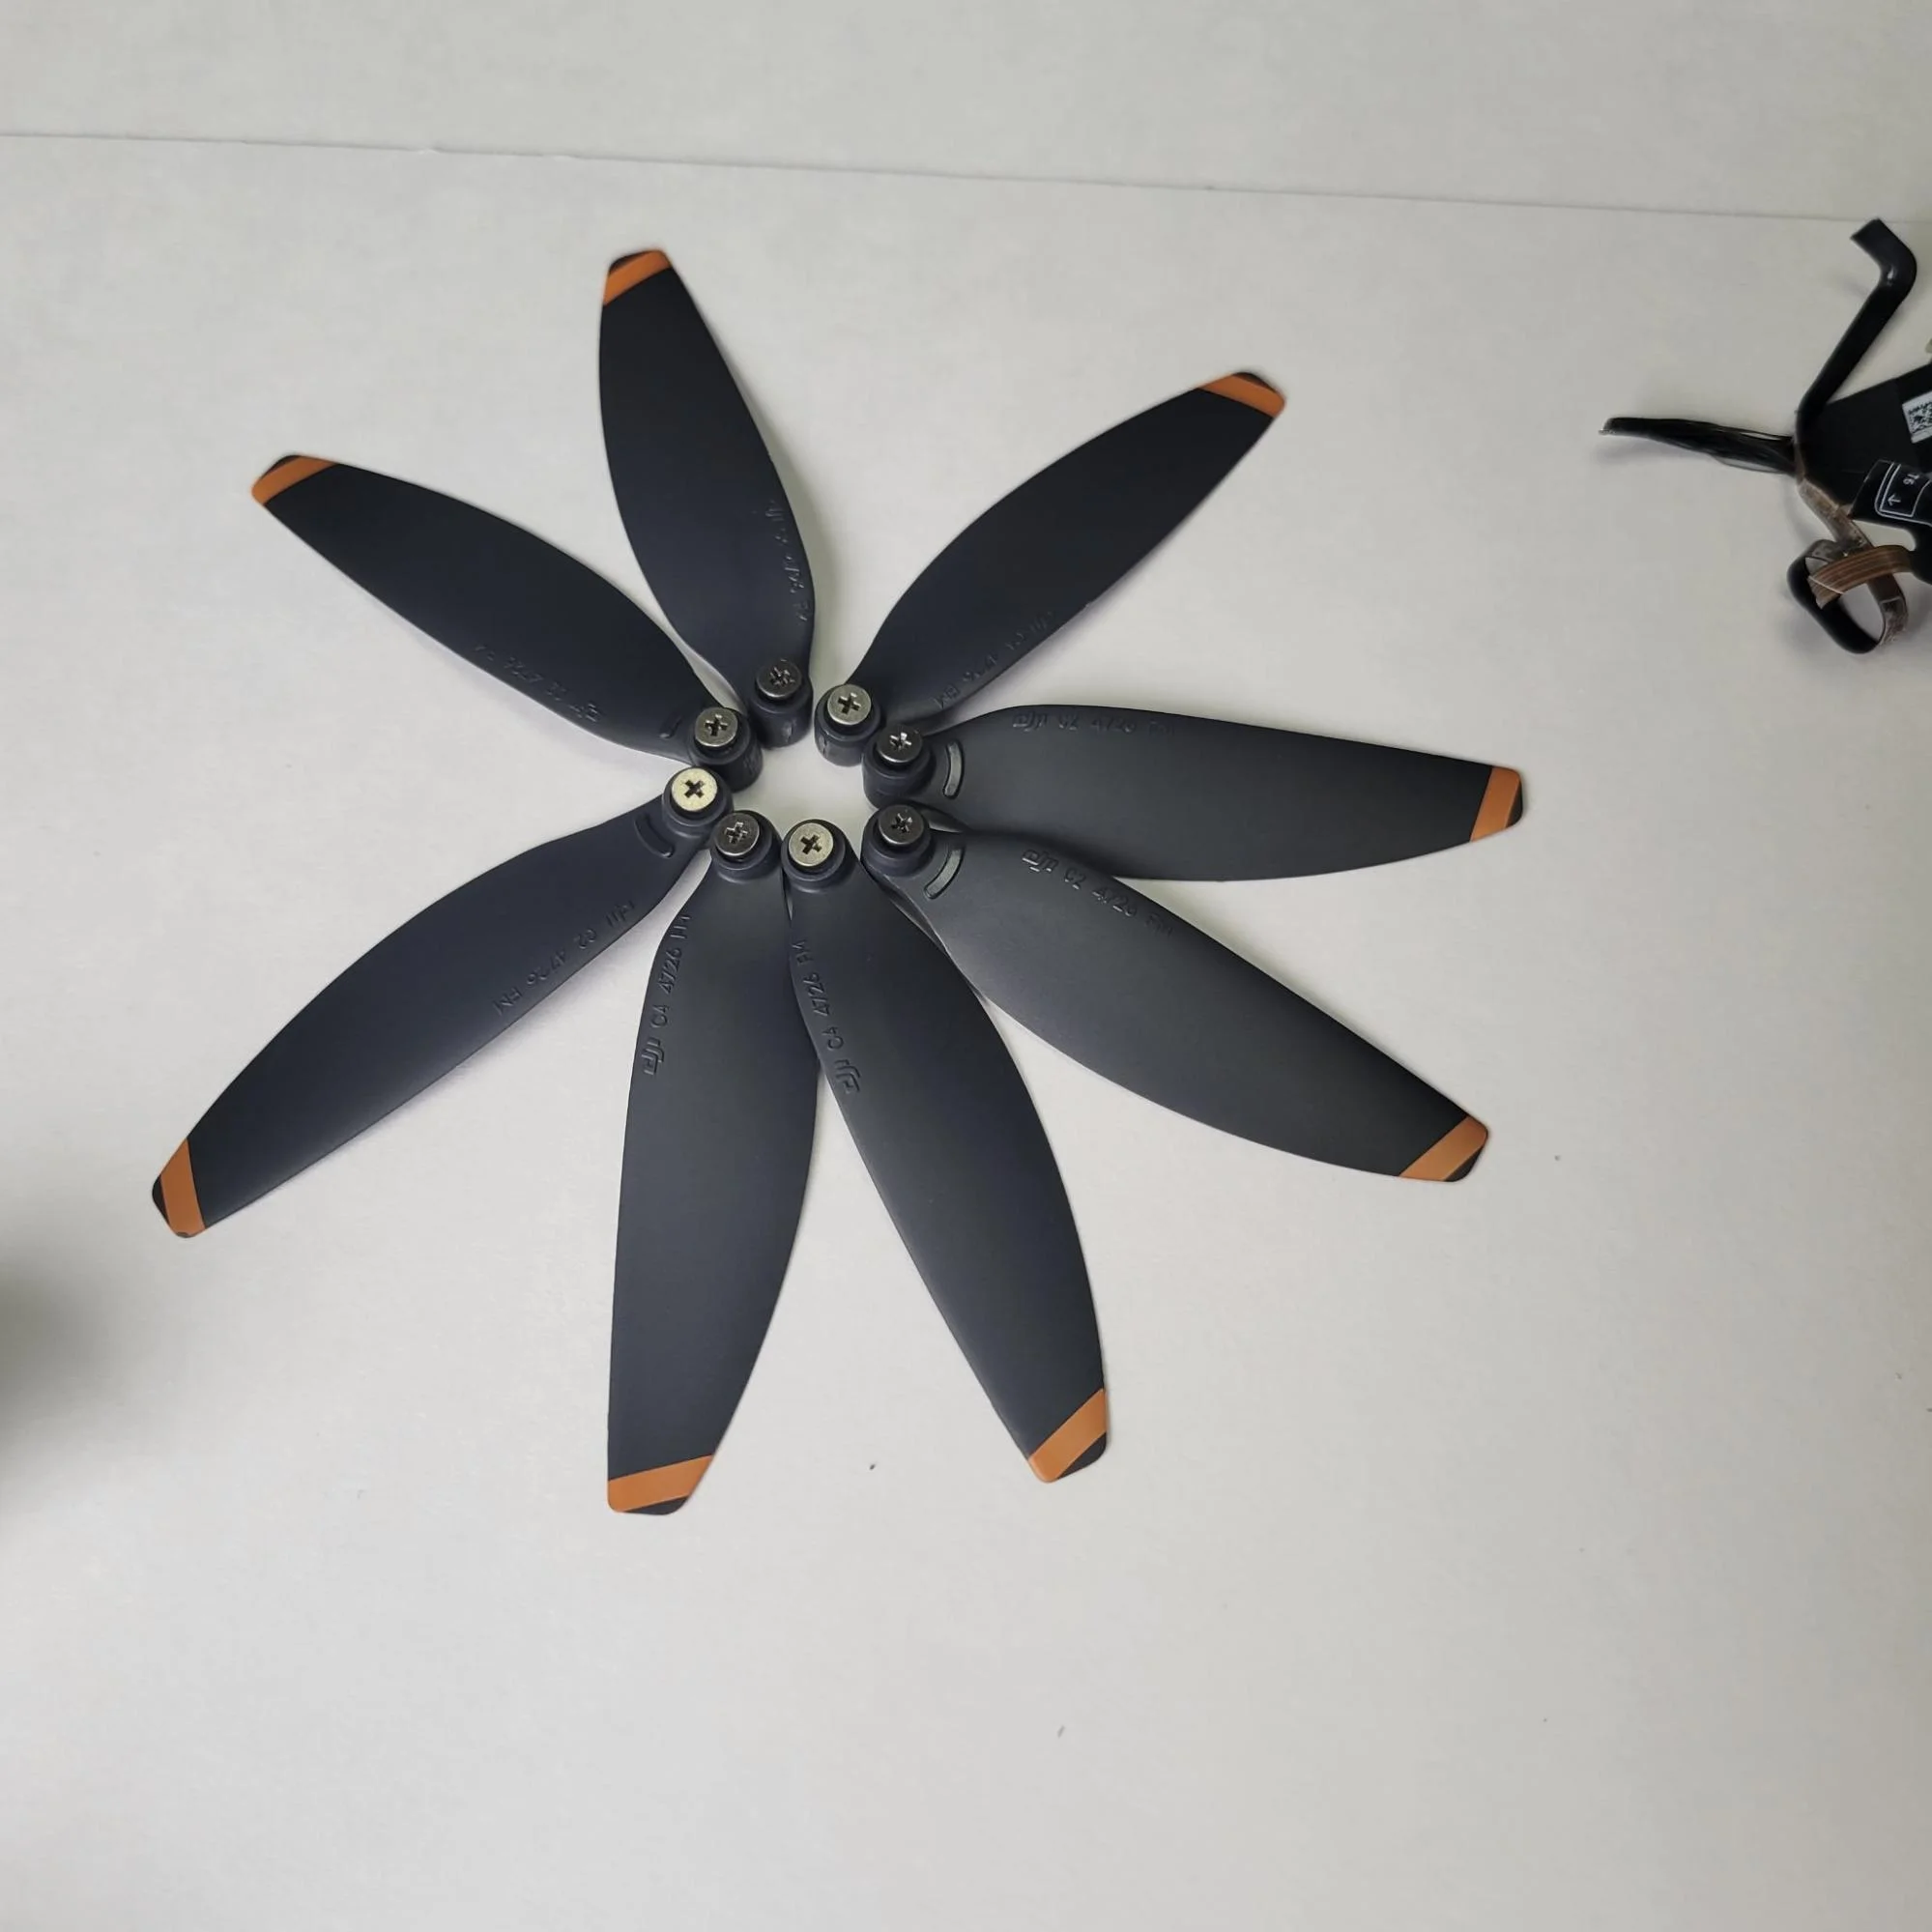 All the propeller blades together
